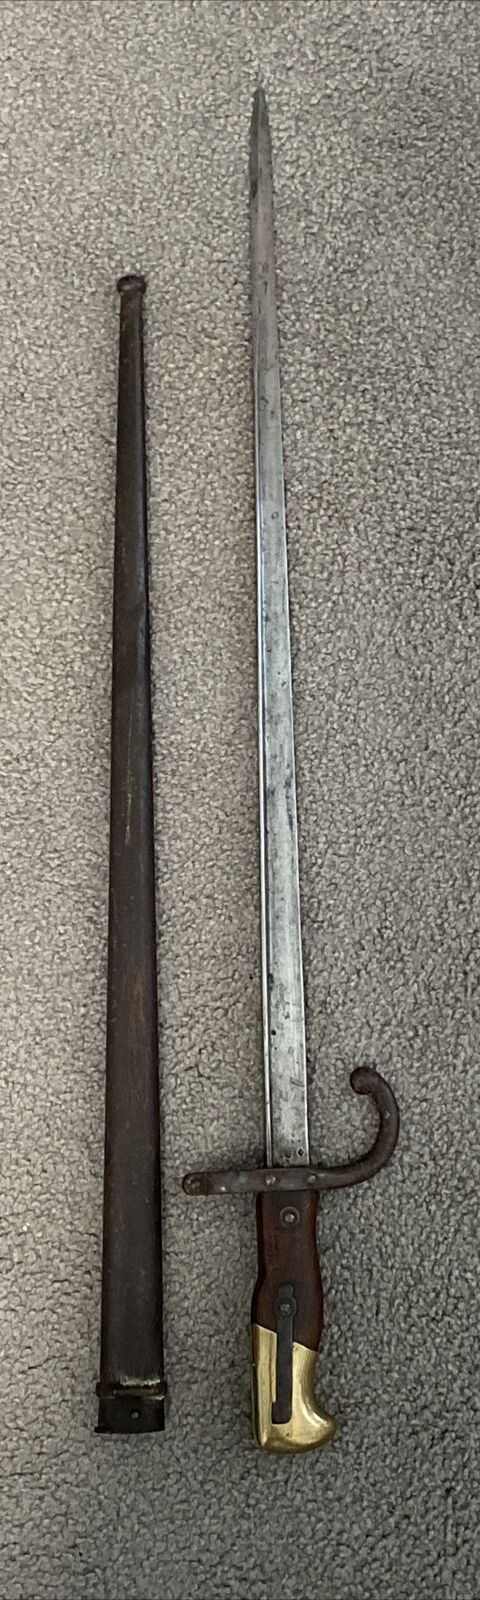 French Antique M1874 Sword Bayonet w Scabbard for Gras Rifles Made in 1879